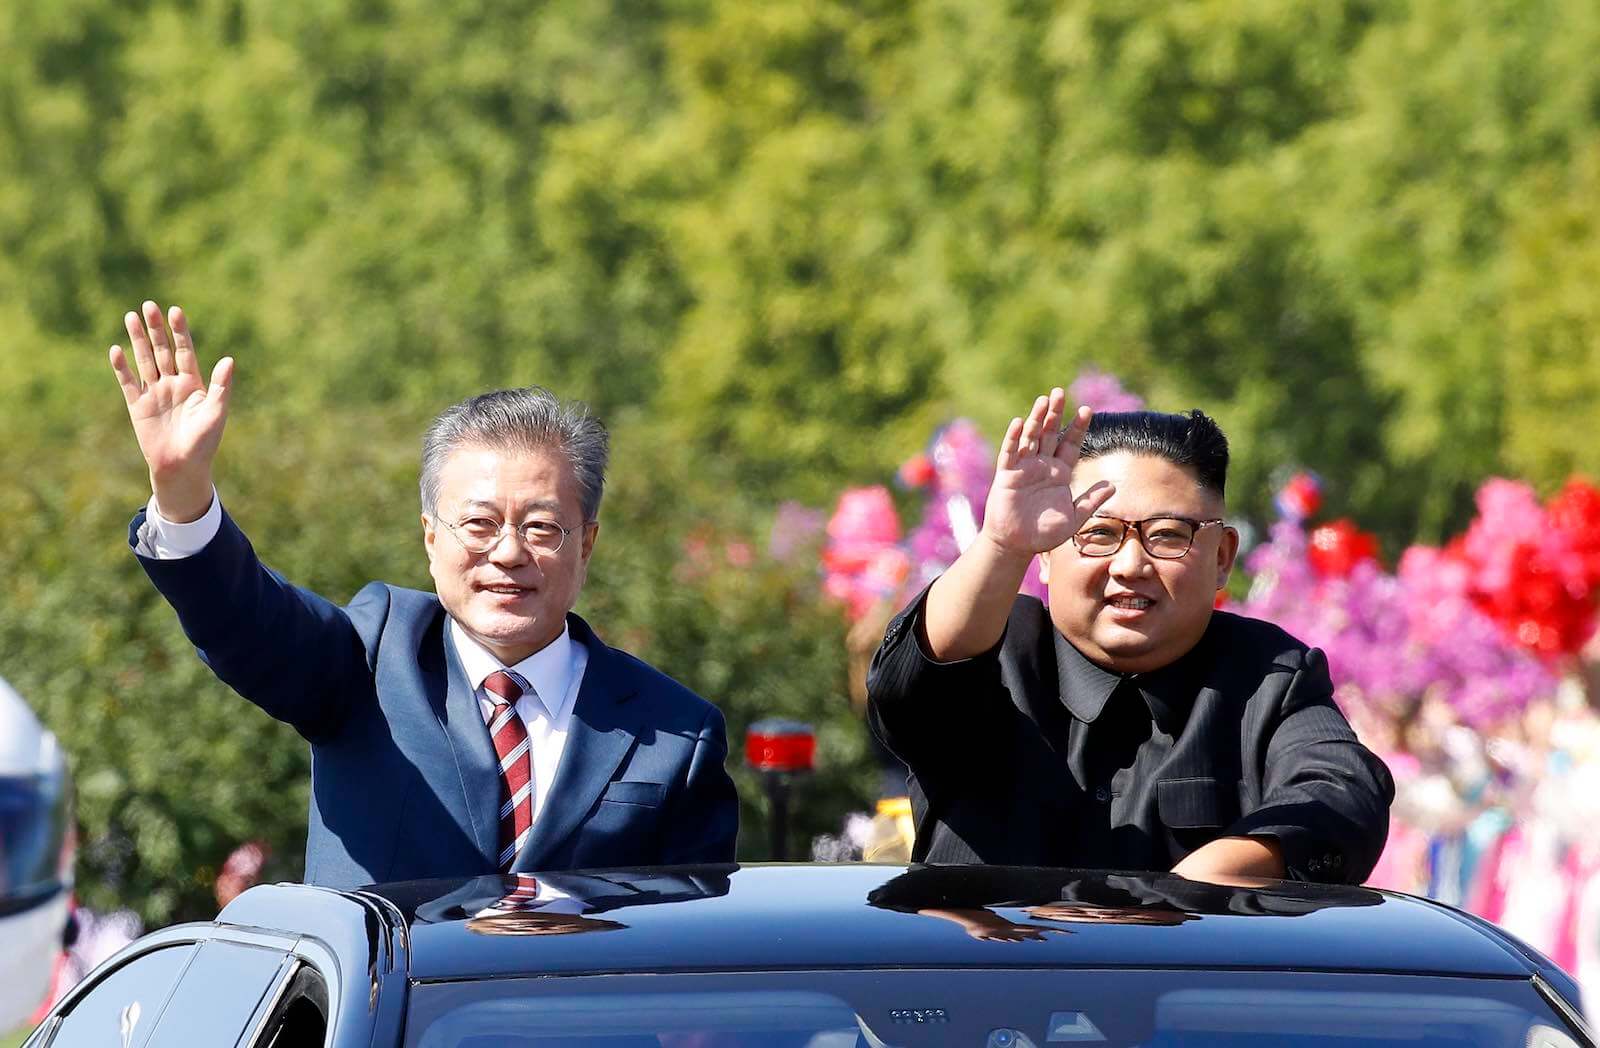 South Korea Pres. Moon Vows to Focus on Normalising Inter-Korean Relations “Until the End”